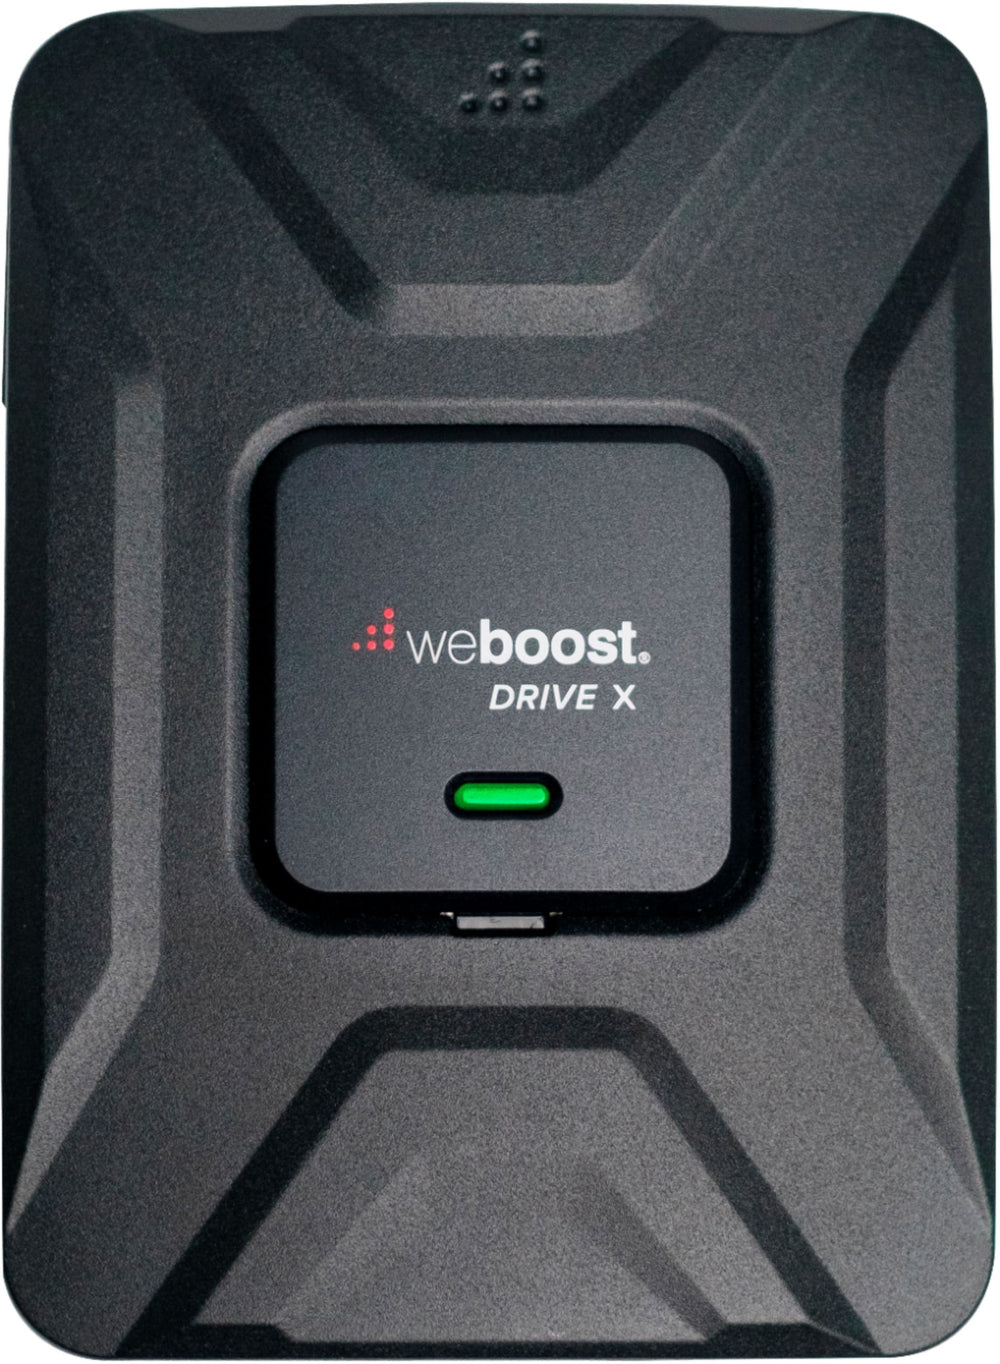 weBoost - Drive X Vehicle Cell Phone Signal Booster for Car, Truck, Van, or SUV, Boosts 5G & 4G LTE for All U.S. Carriers_1